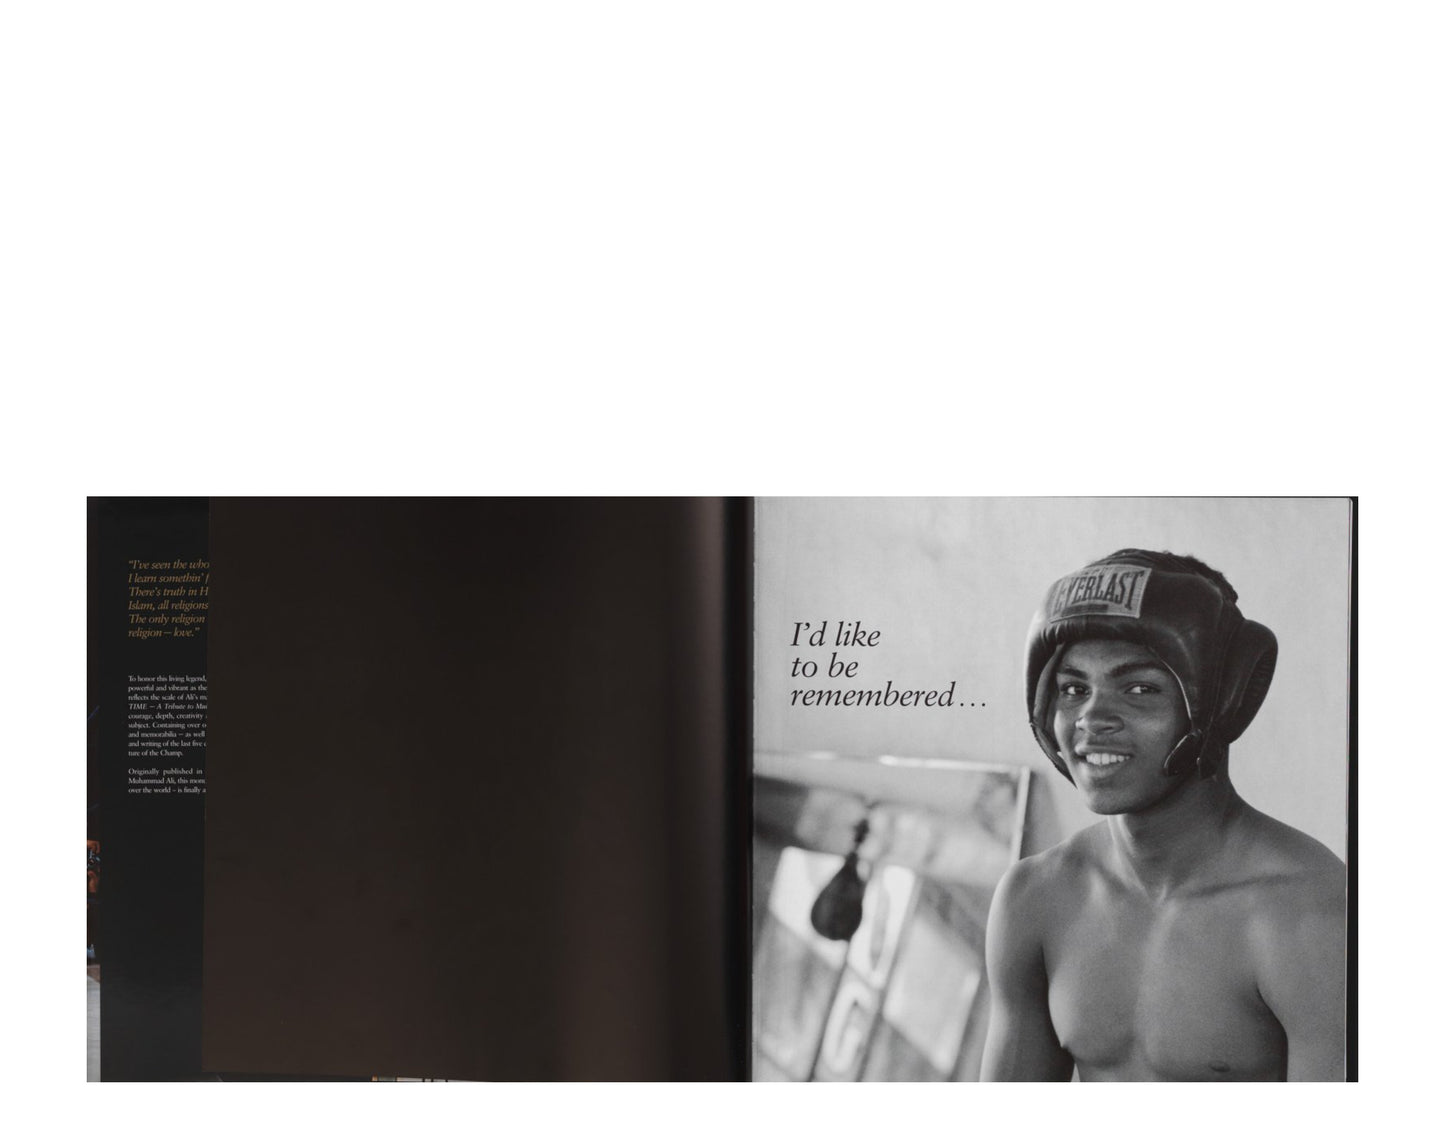 Taschen Books - Greatest of All Time - A Tribute to Muhammad Ali Hardcover Book